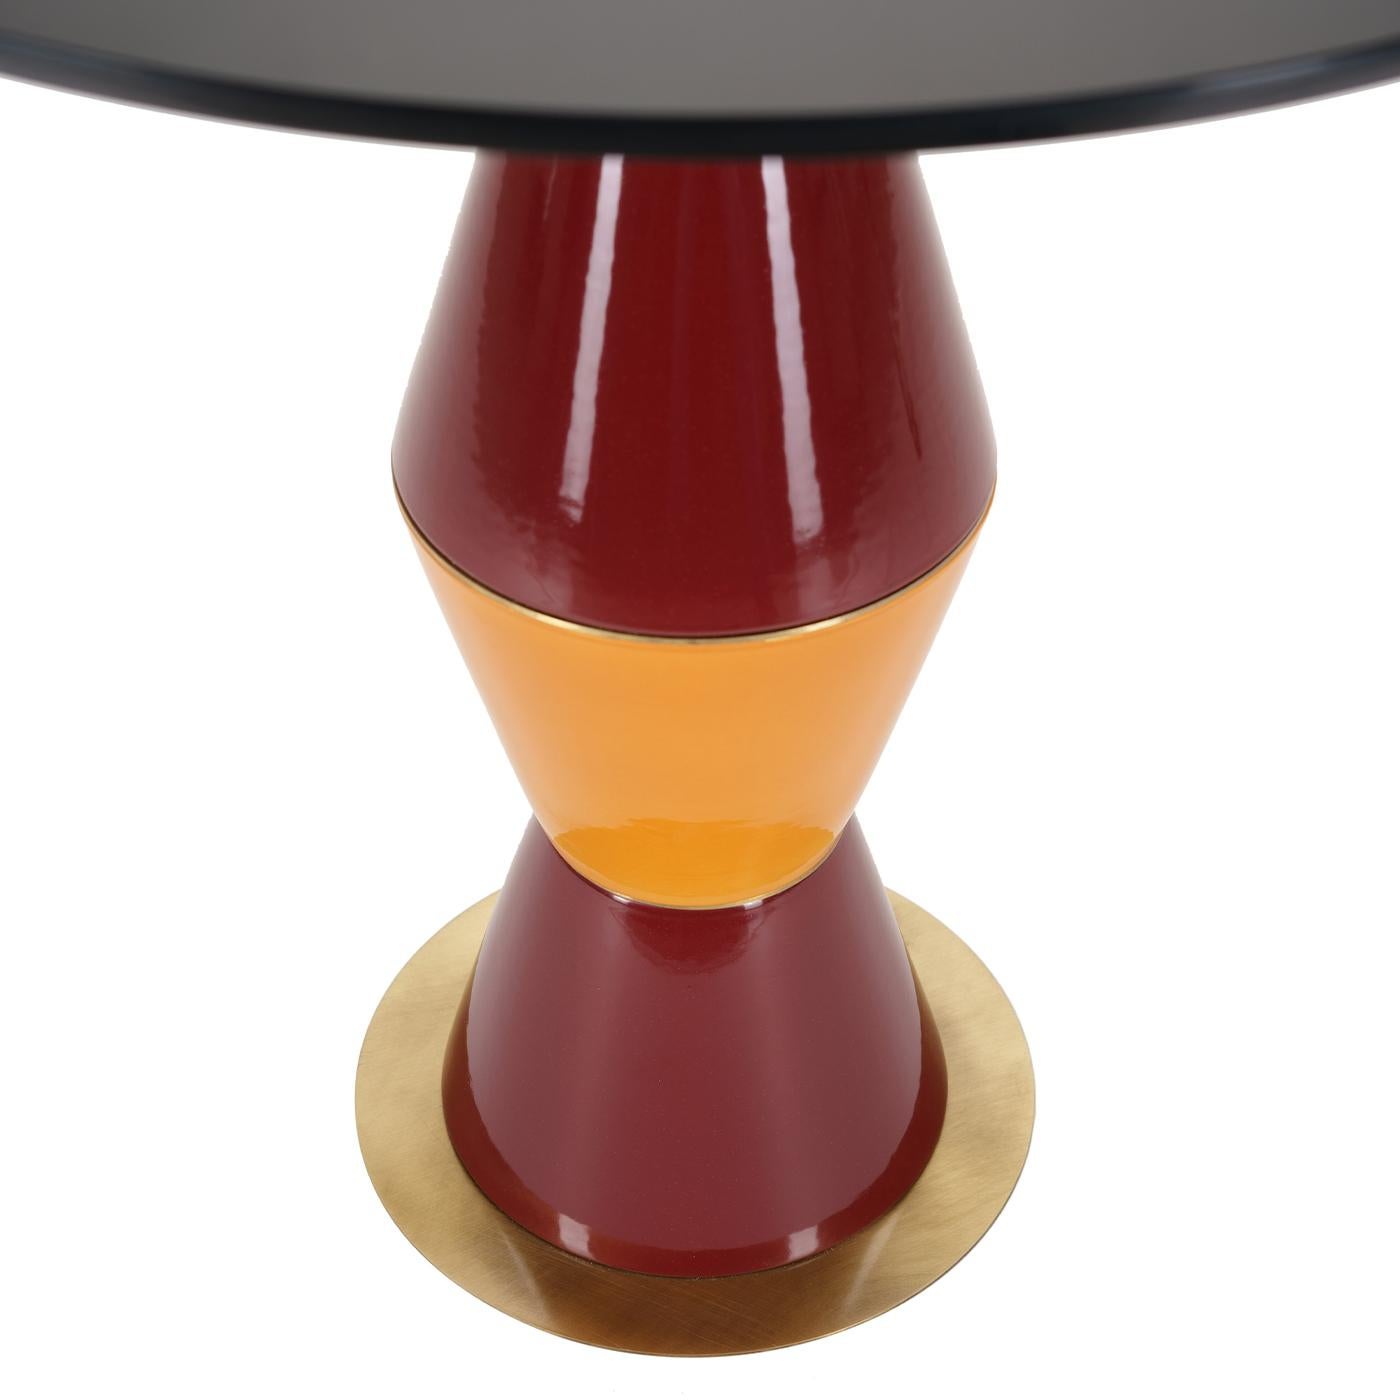 This eclectic design exudes a mesmerizing character that will make an iconic addition to a contemporary interior. Handmade of ceramic, the stem is comprised of four cone-shaped elements combining red and orange hues. The round base is in brass,